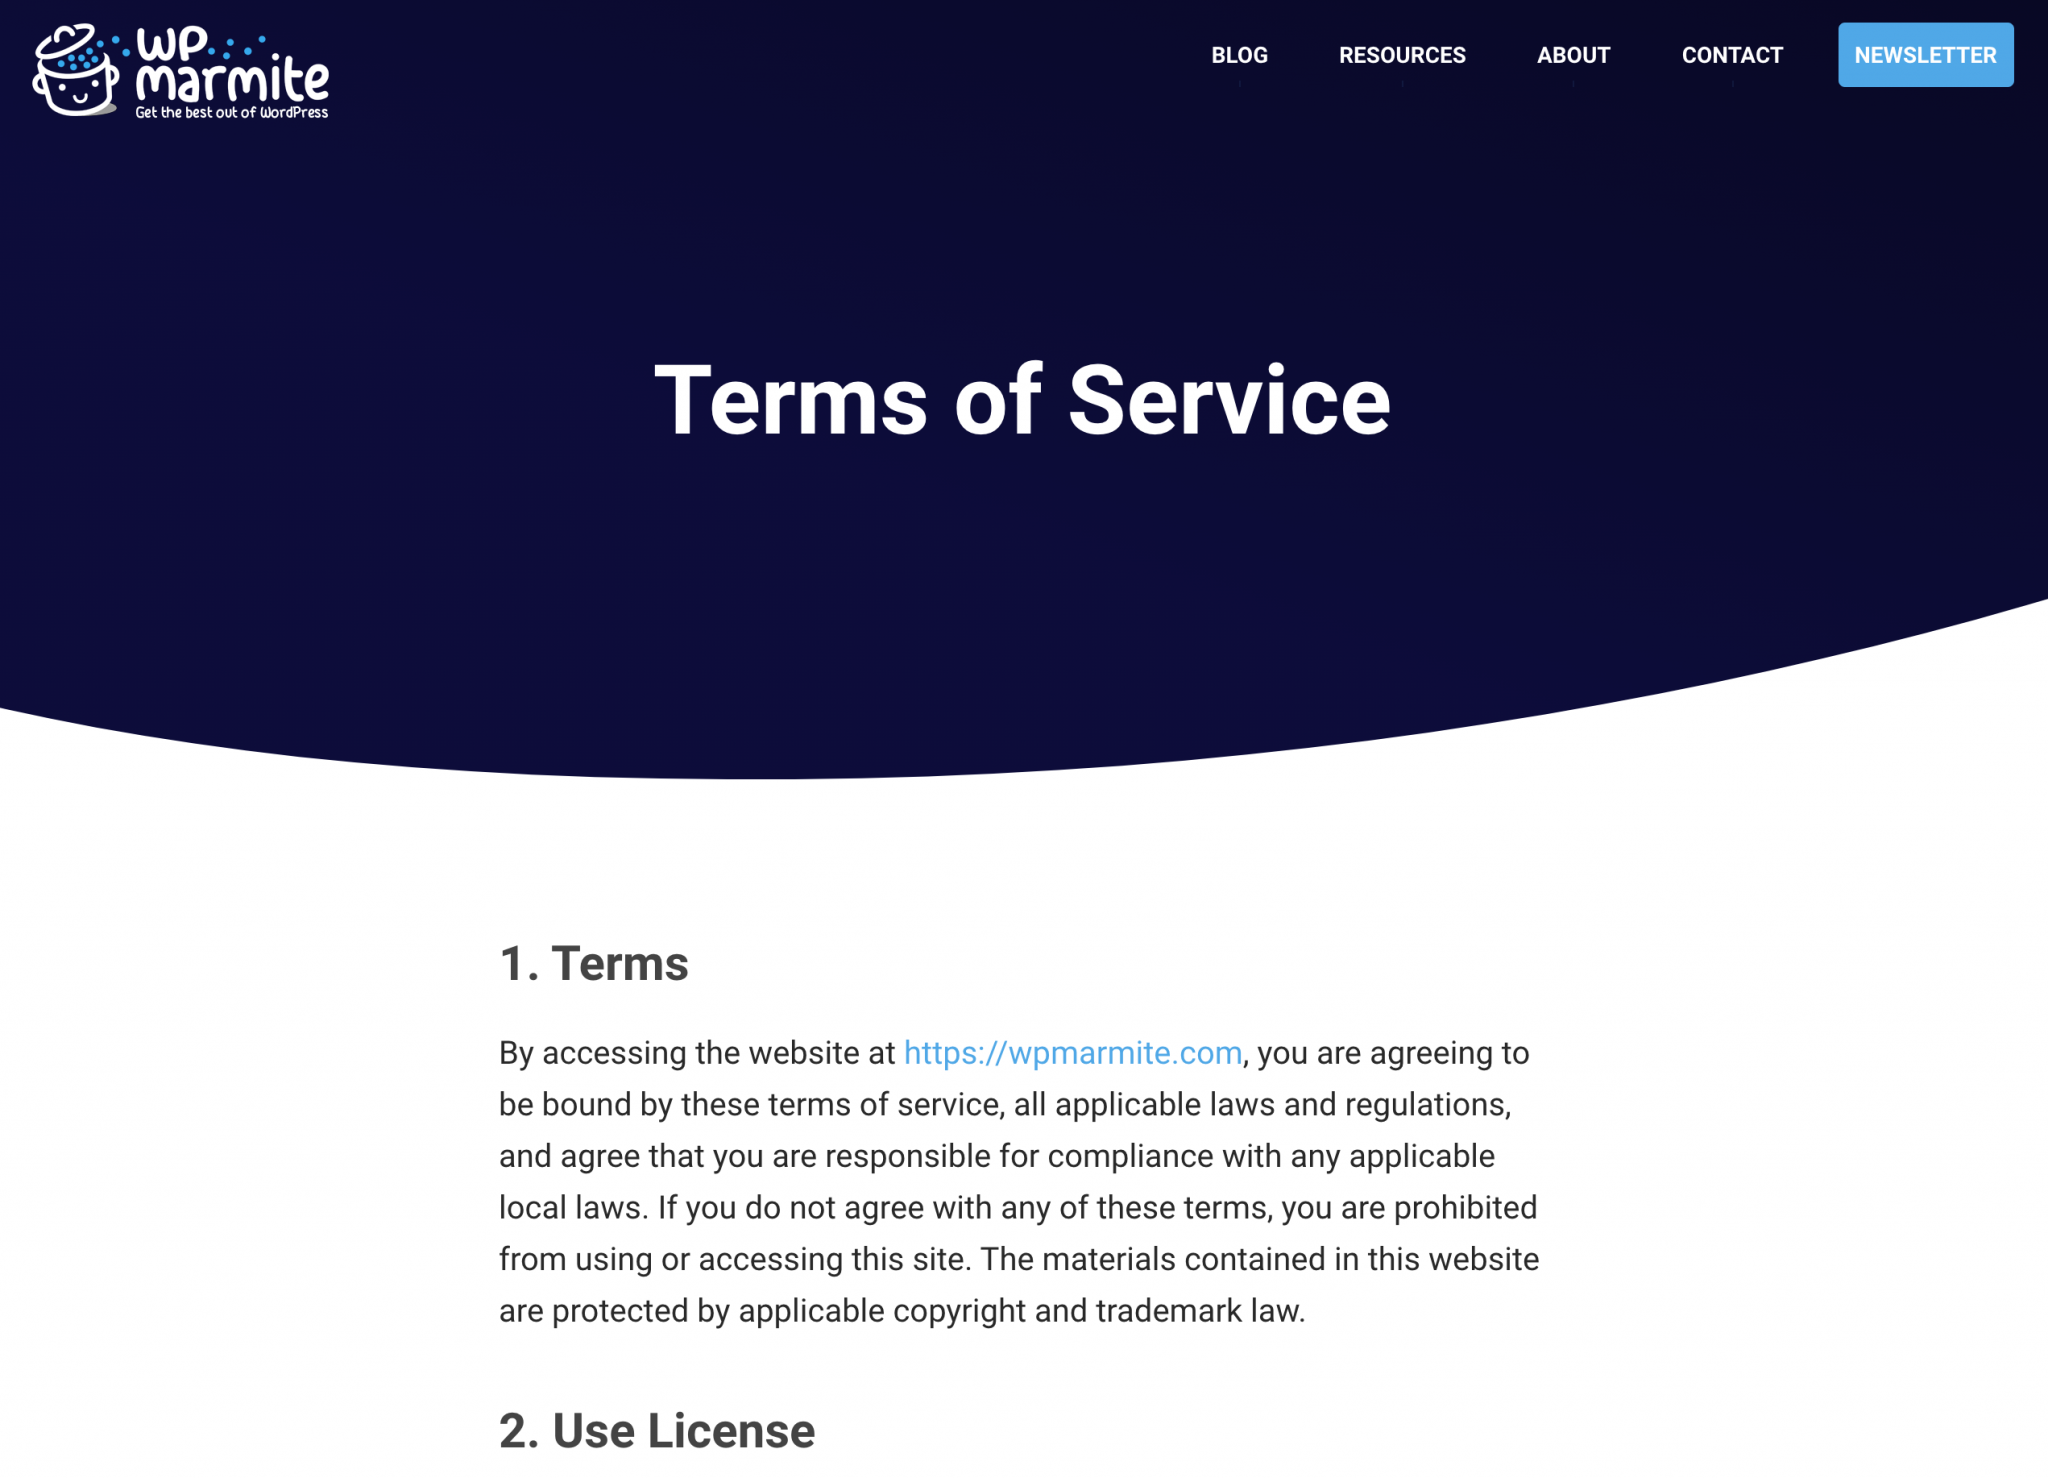 Overview of the terms of service on WPMarmite.com